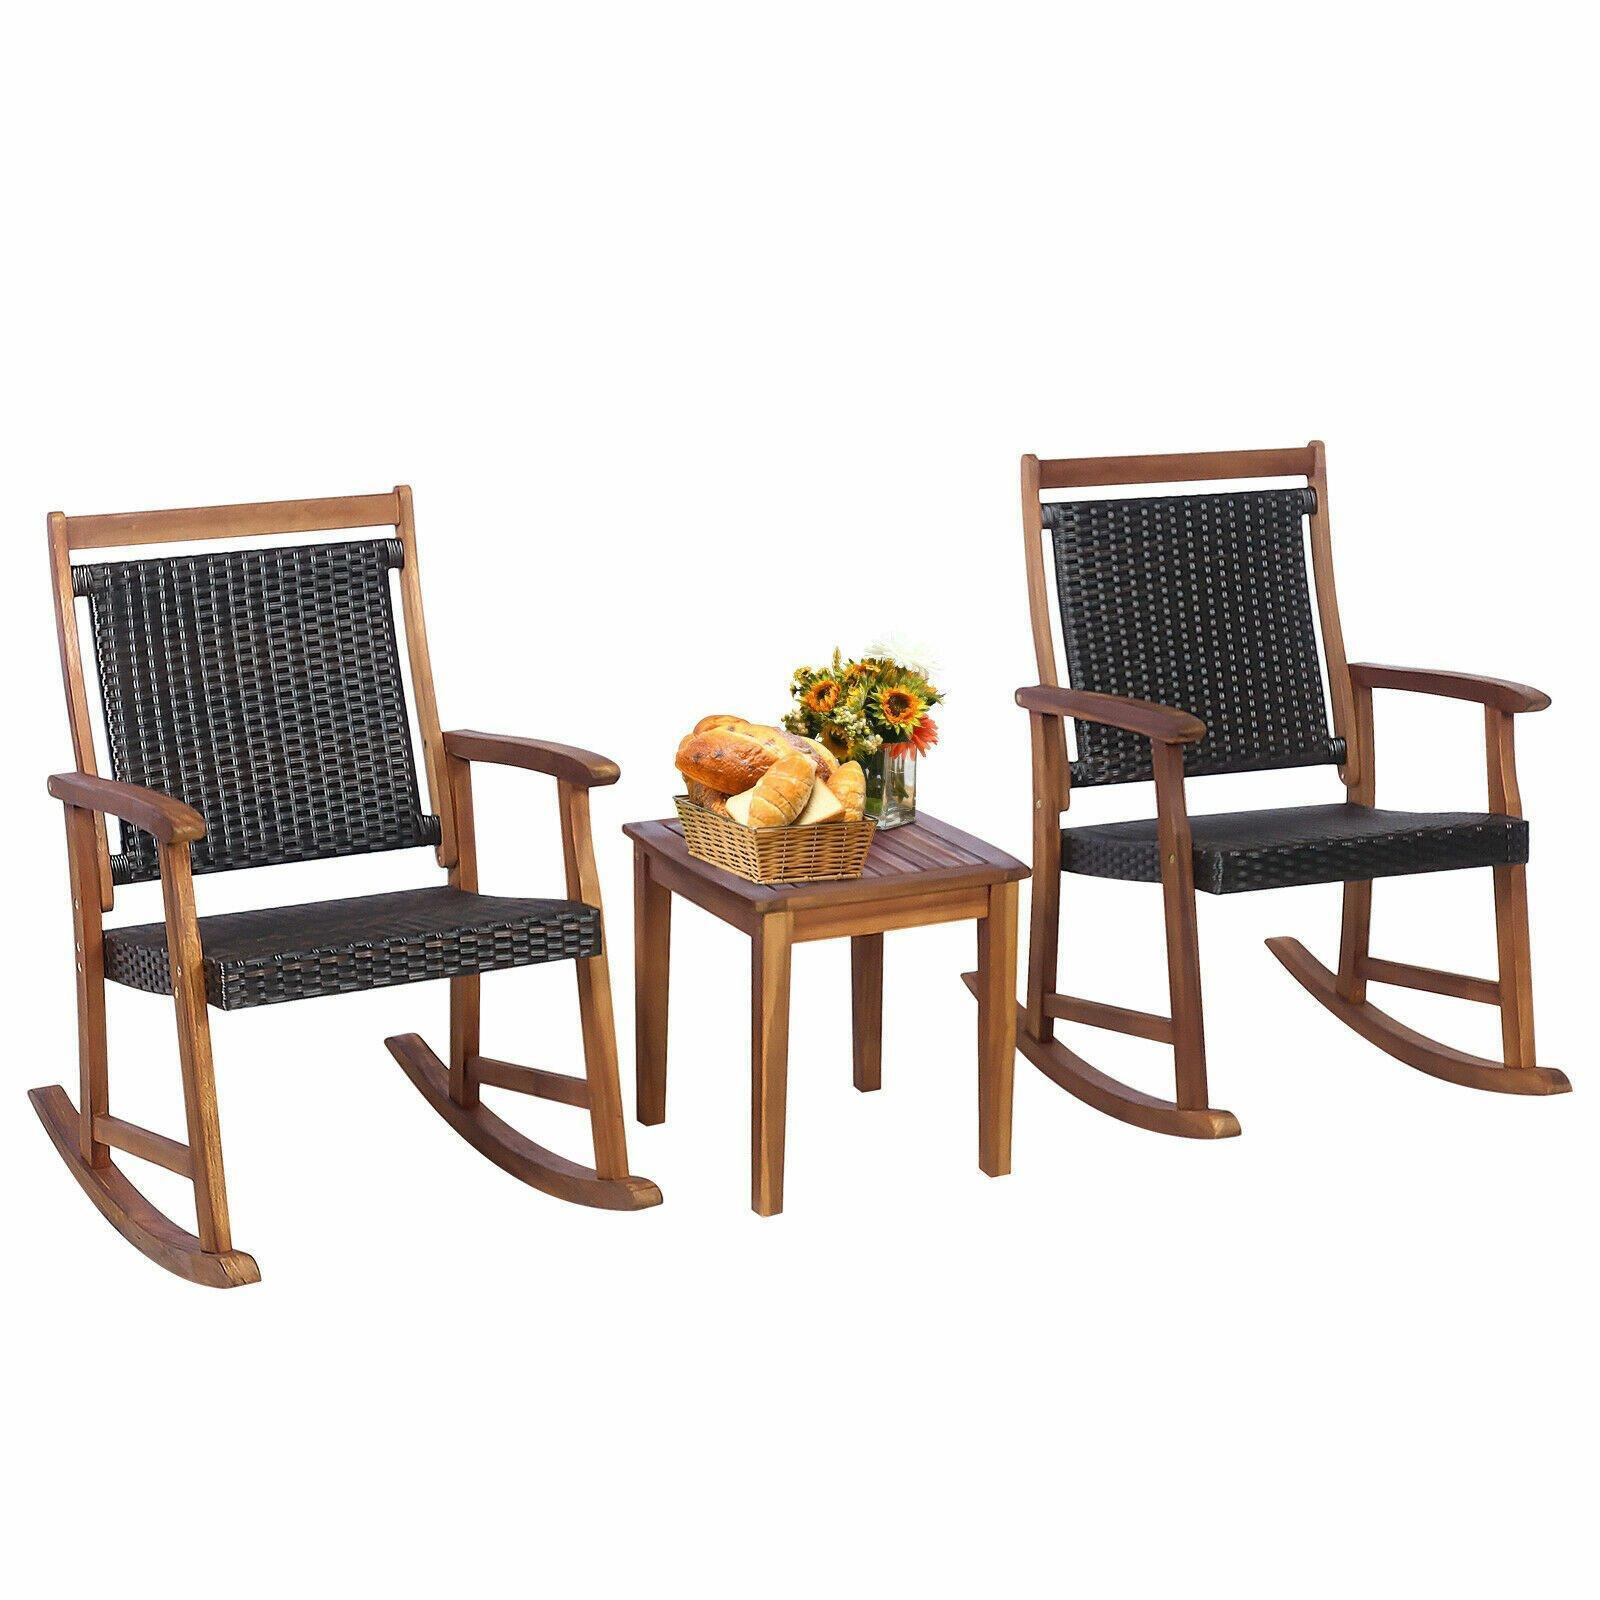 3 PCS Rocking Table Chairs Set, Solid Wood High Back Bistro Set, Outdoor Relax Rocker Conversation Set for Garden Patio Poolside - image 1